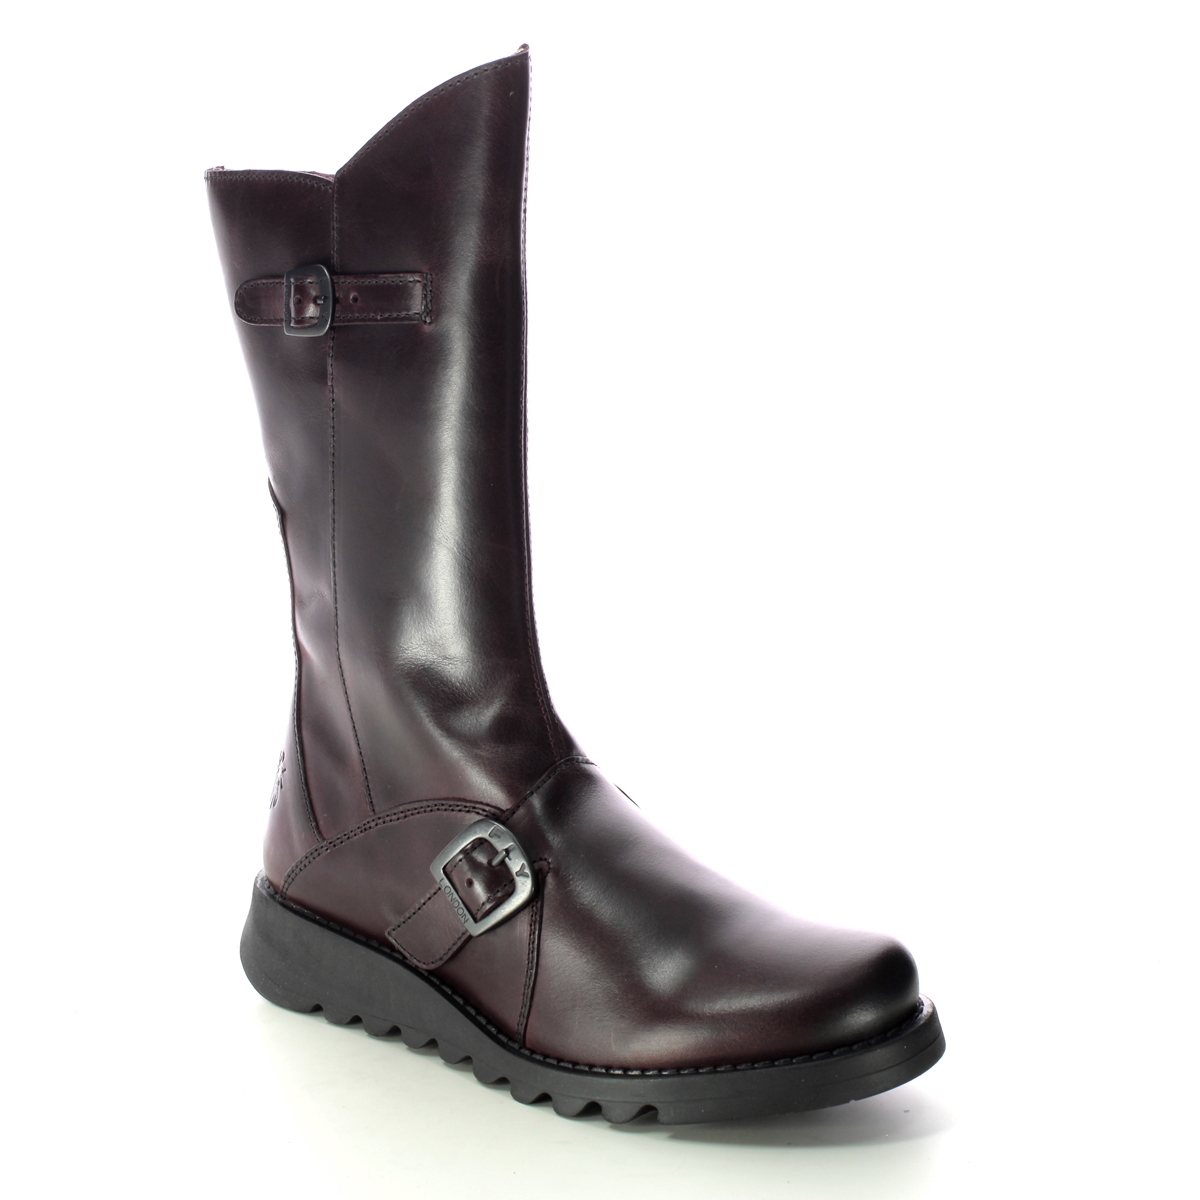 Fly London Mes 2 Wine leather Womens Mid Calf Boots P142913-032 in a Plain Leather in Size 40